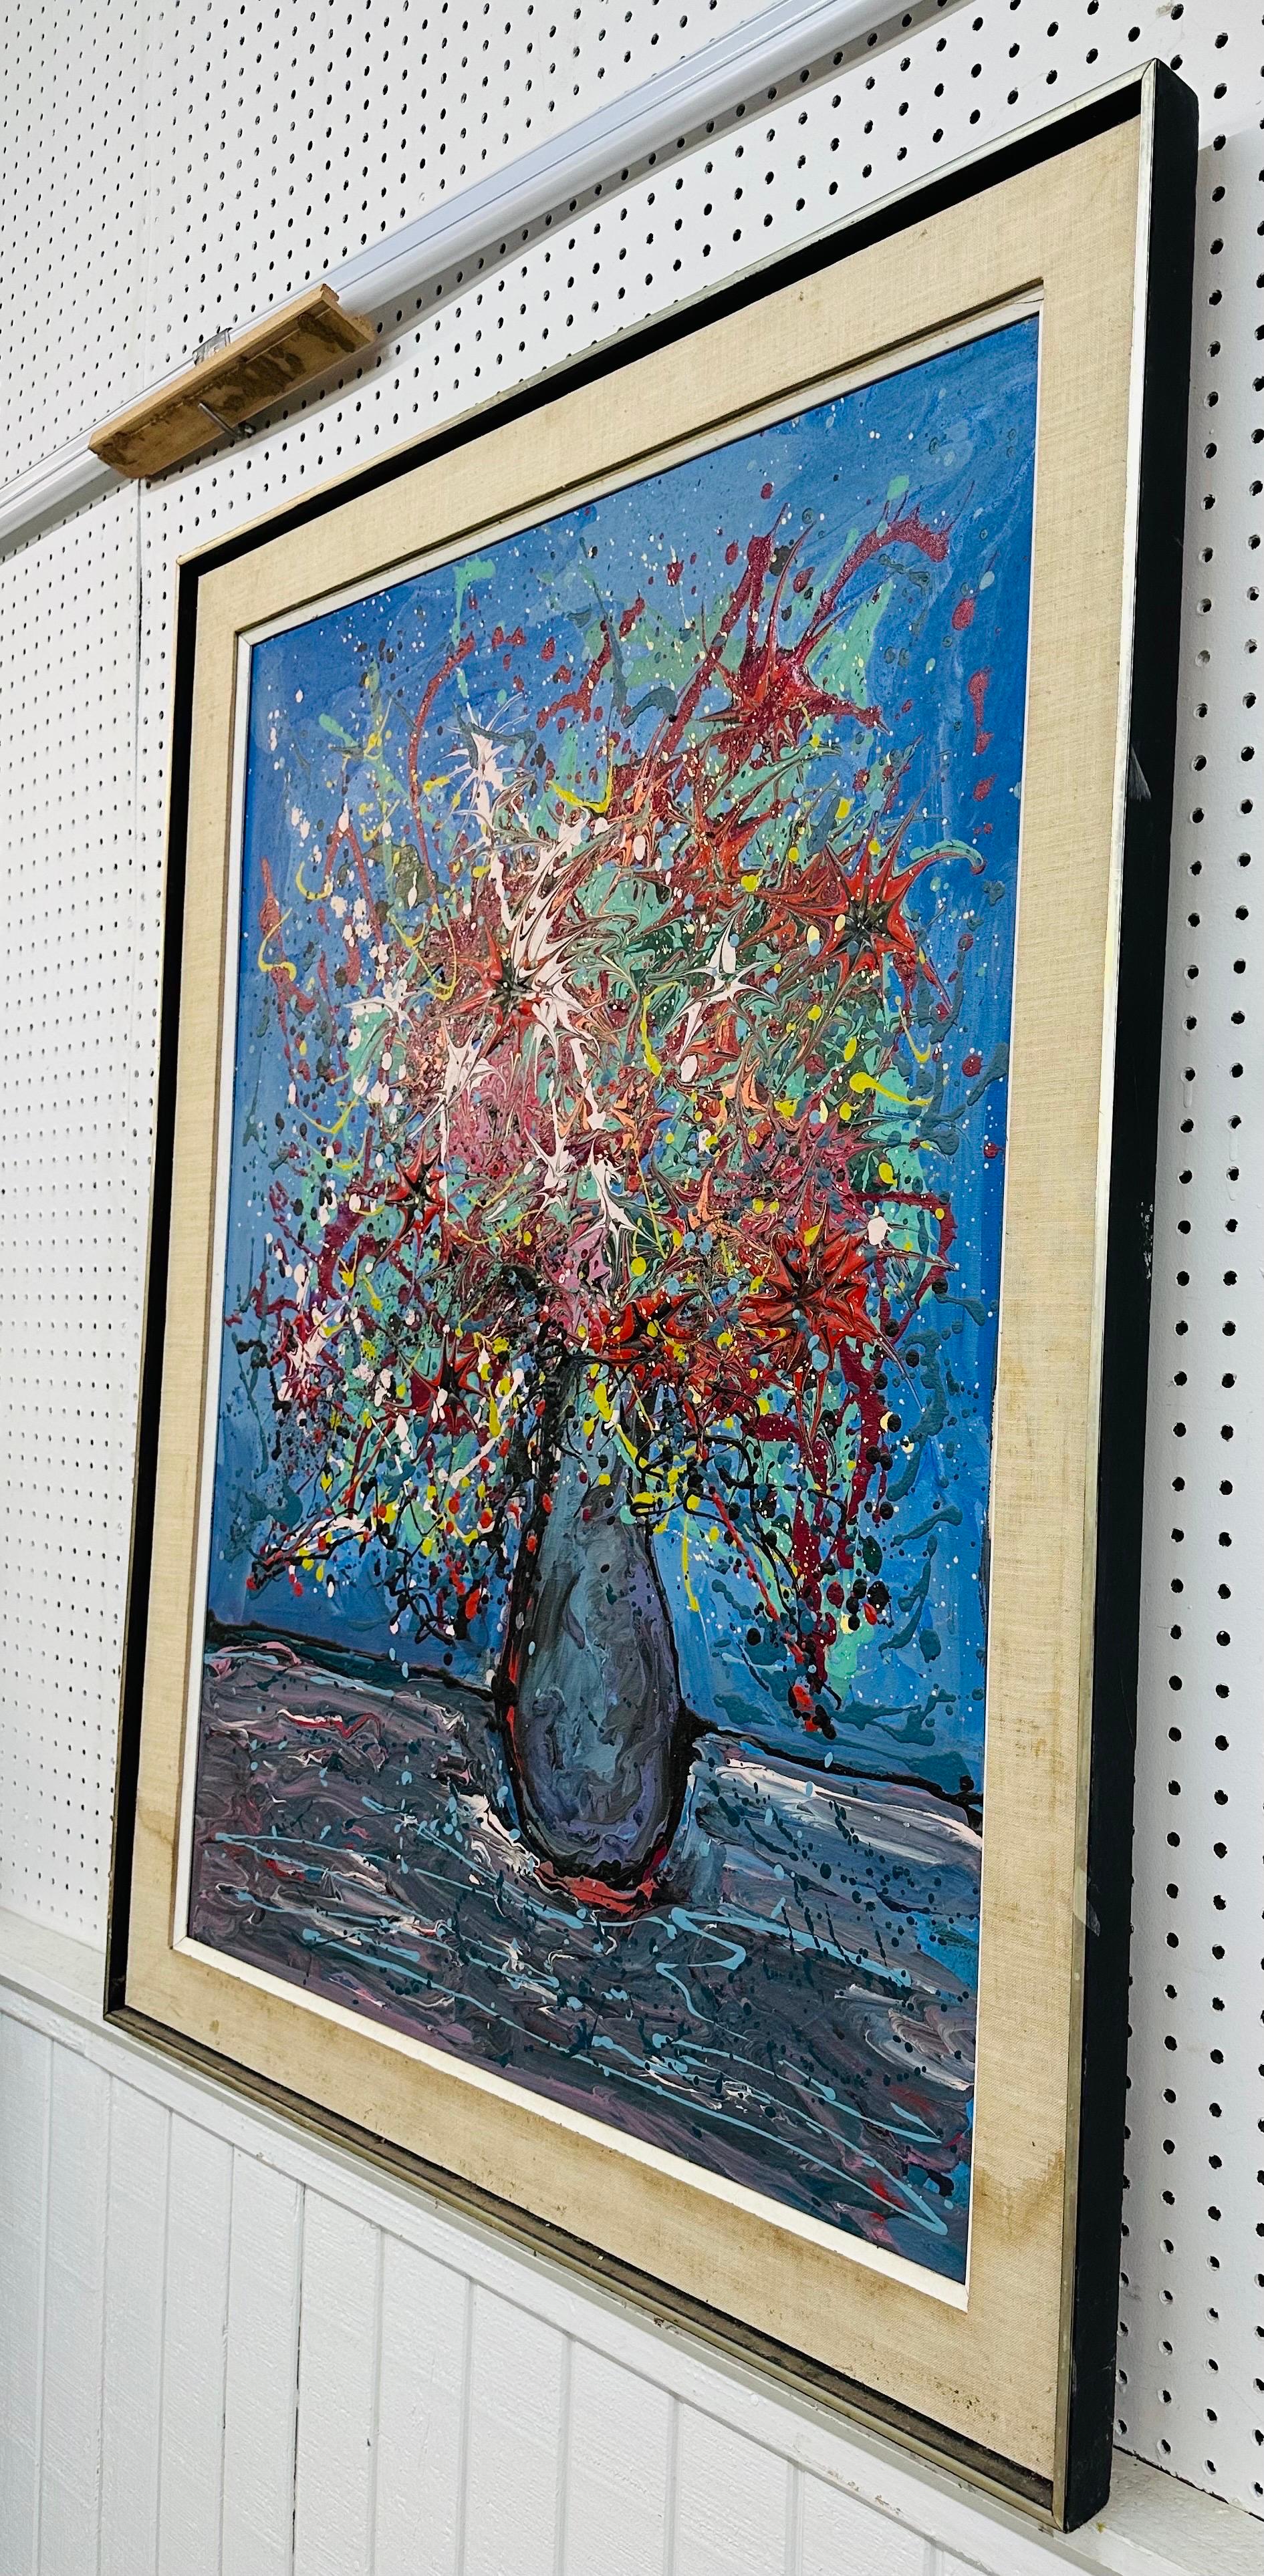 This listing is for a Mid-Century Modern Floral Abstract Expressionist Painting. Featuring an original frame, mixture of colors, date/signature on the back, and wire for hanging. This is an exceptional combination of quality and design!